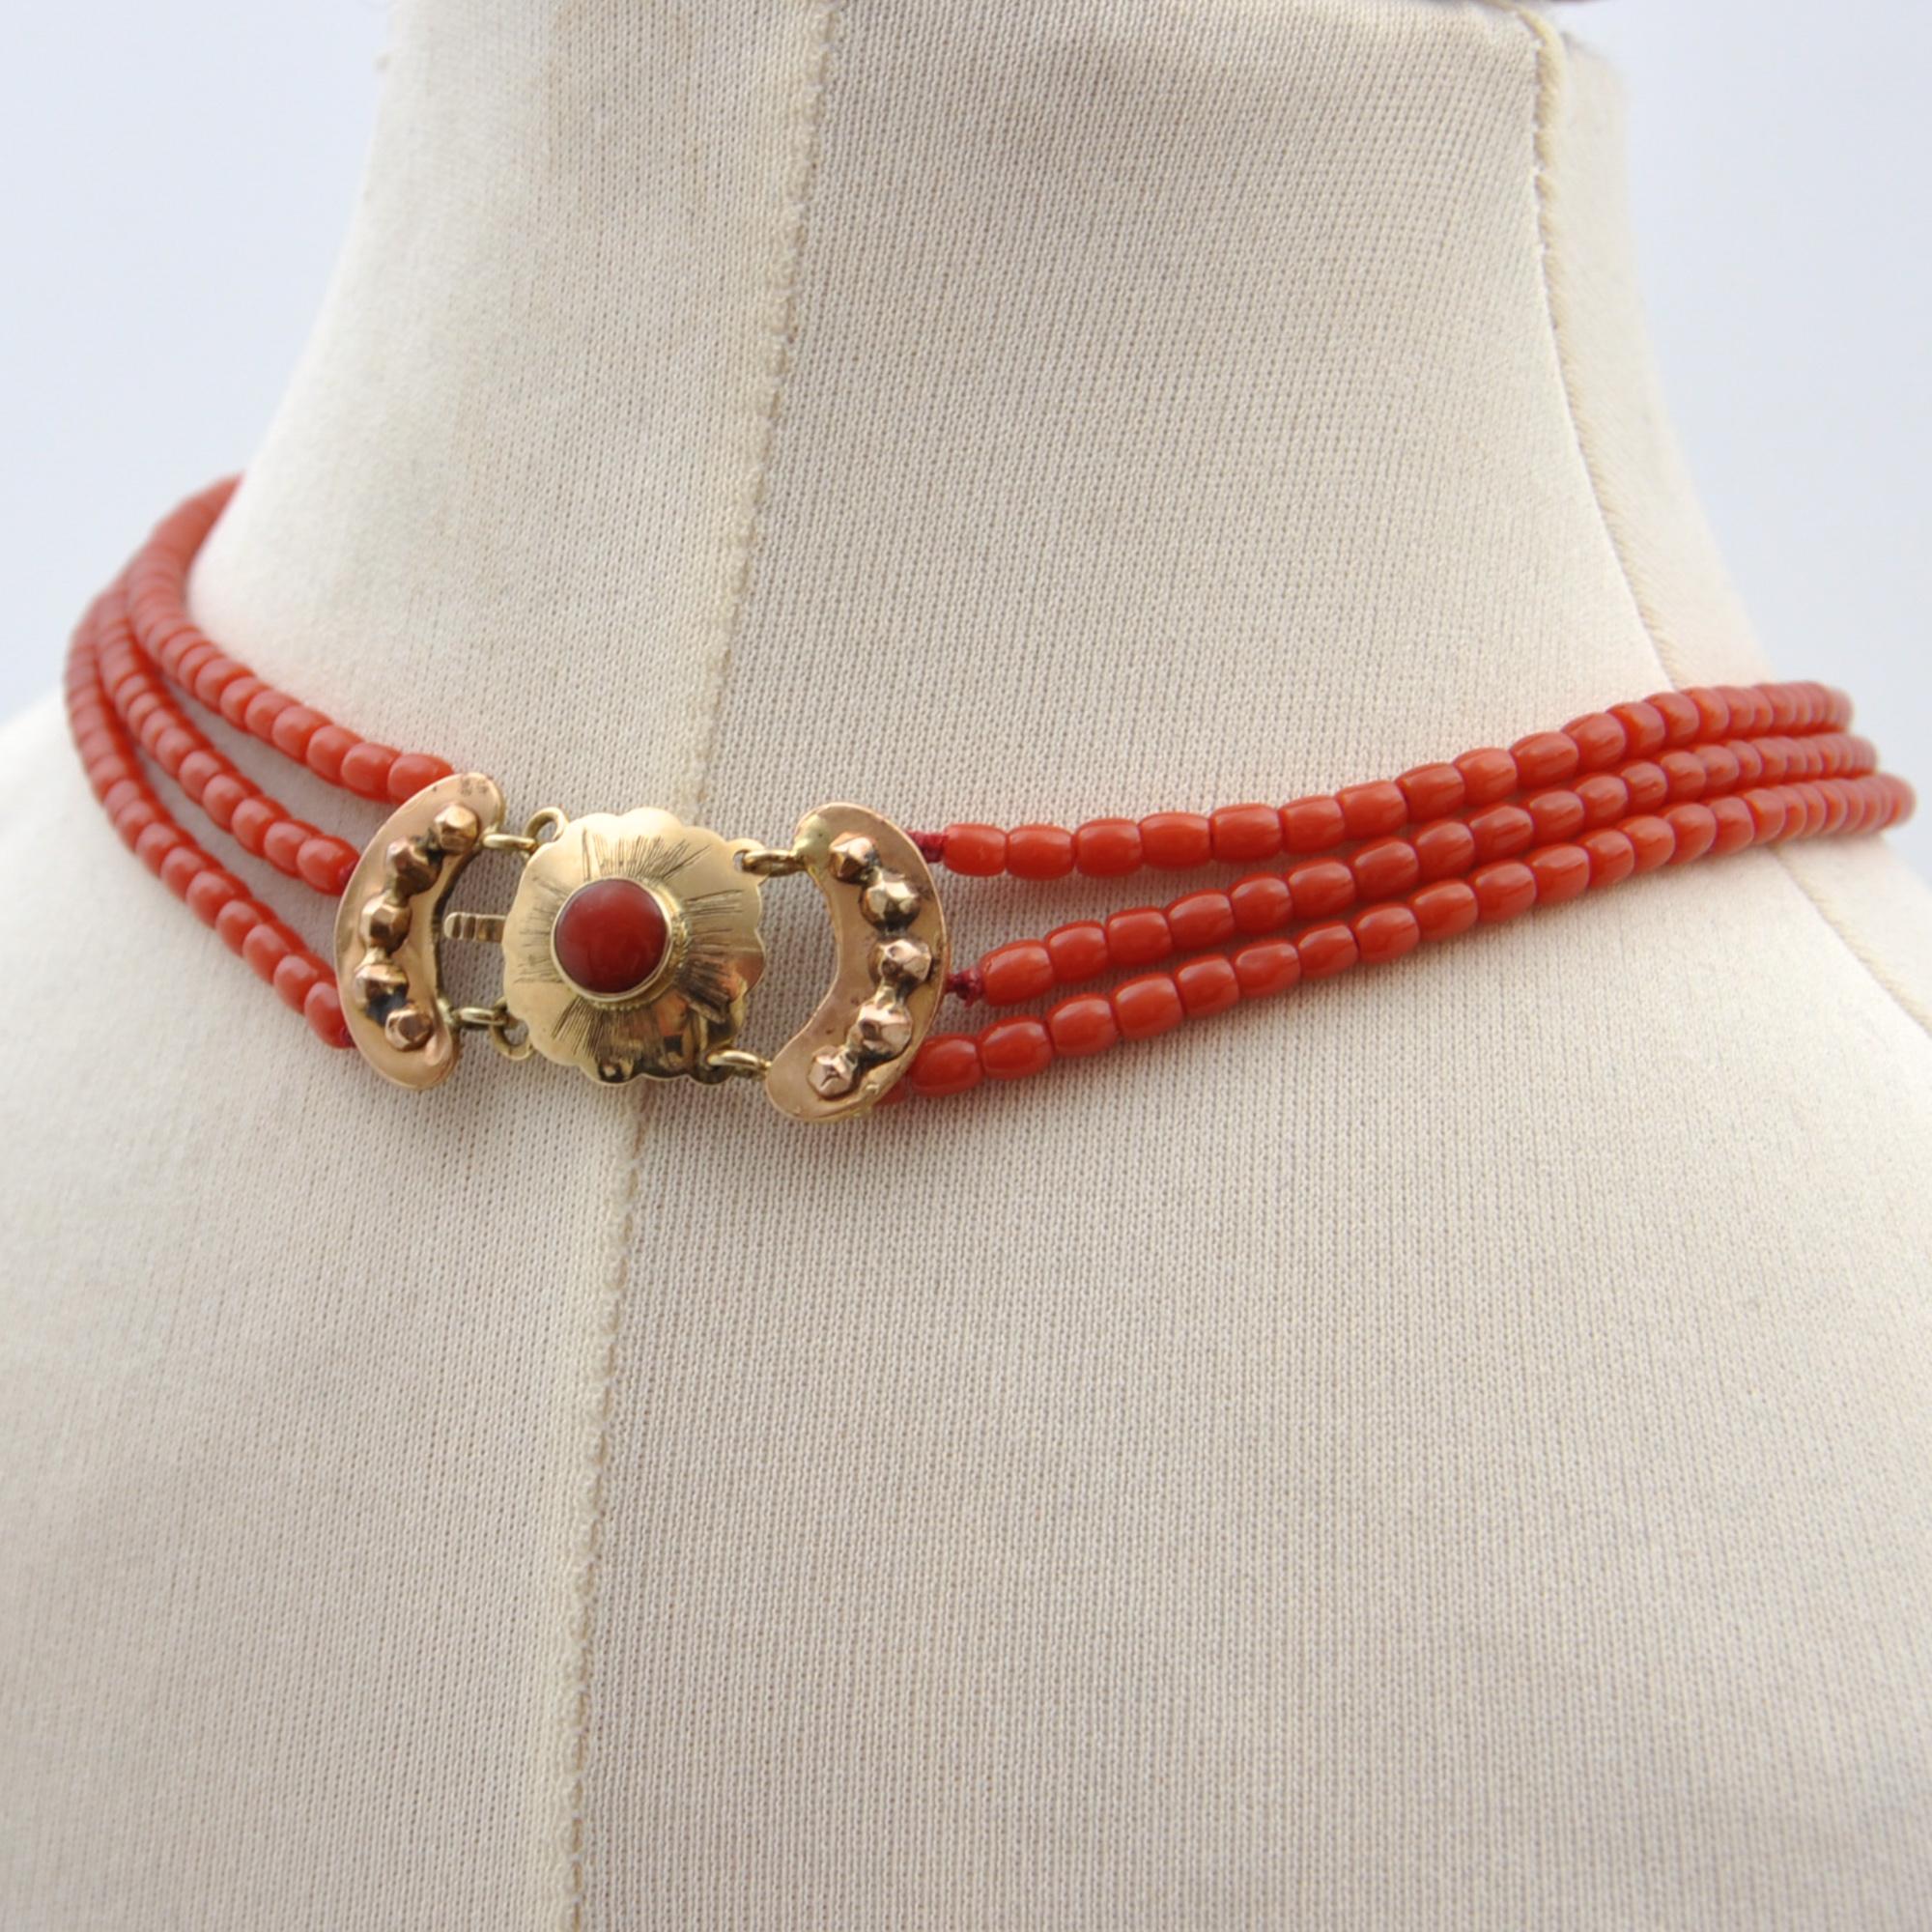 This antique late 19th century coral necklace is created with a 14 karat gold clasp. The beautiful three-strand coral necklace is strung with small coral beads and the strands. The clasp has a beautiful scalloped and engraved design flanked by two